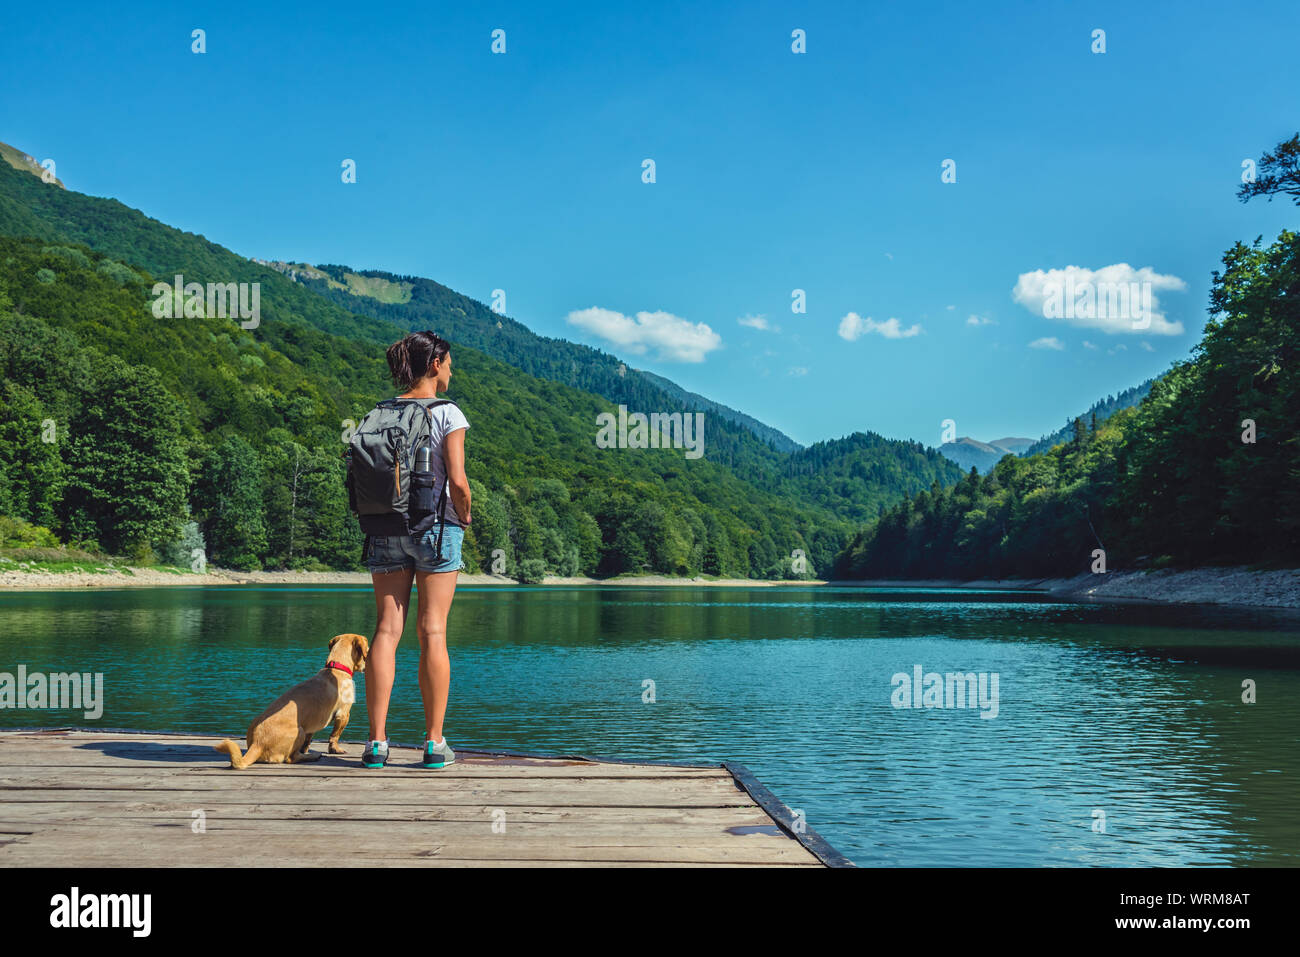 Woman with a small yellow dog standing on a pier and looking at mountains and lake Stock Photo